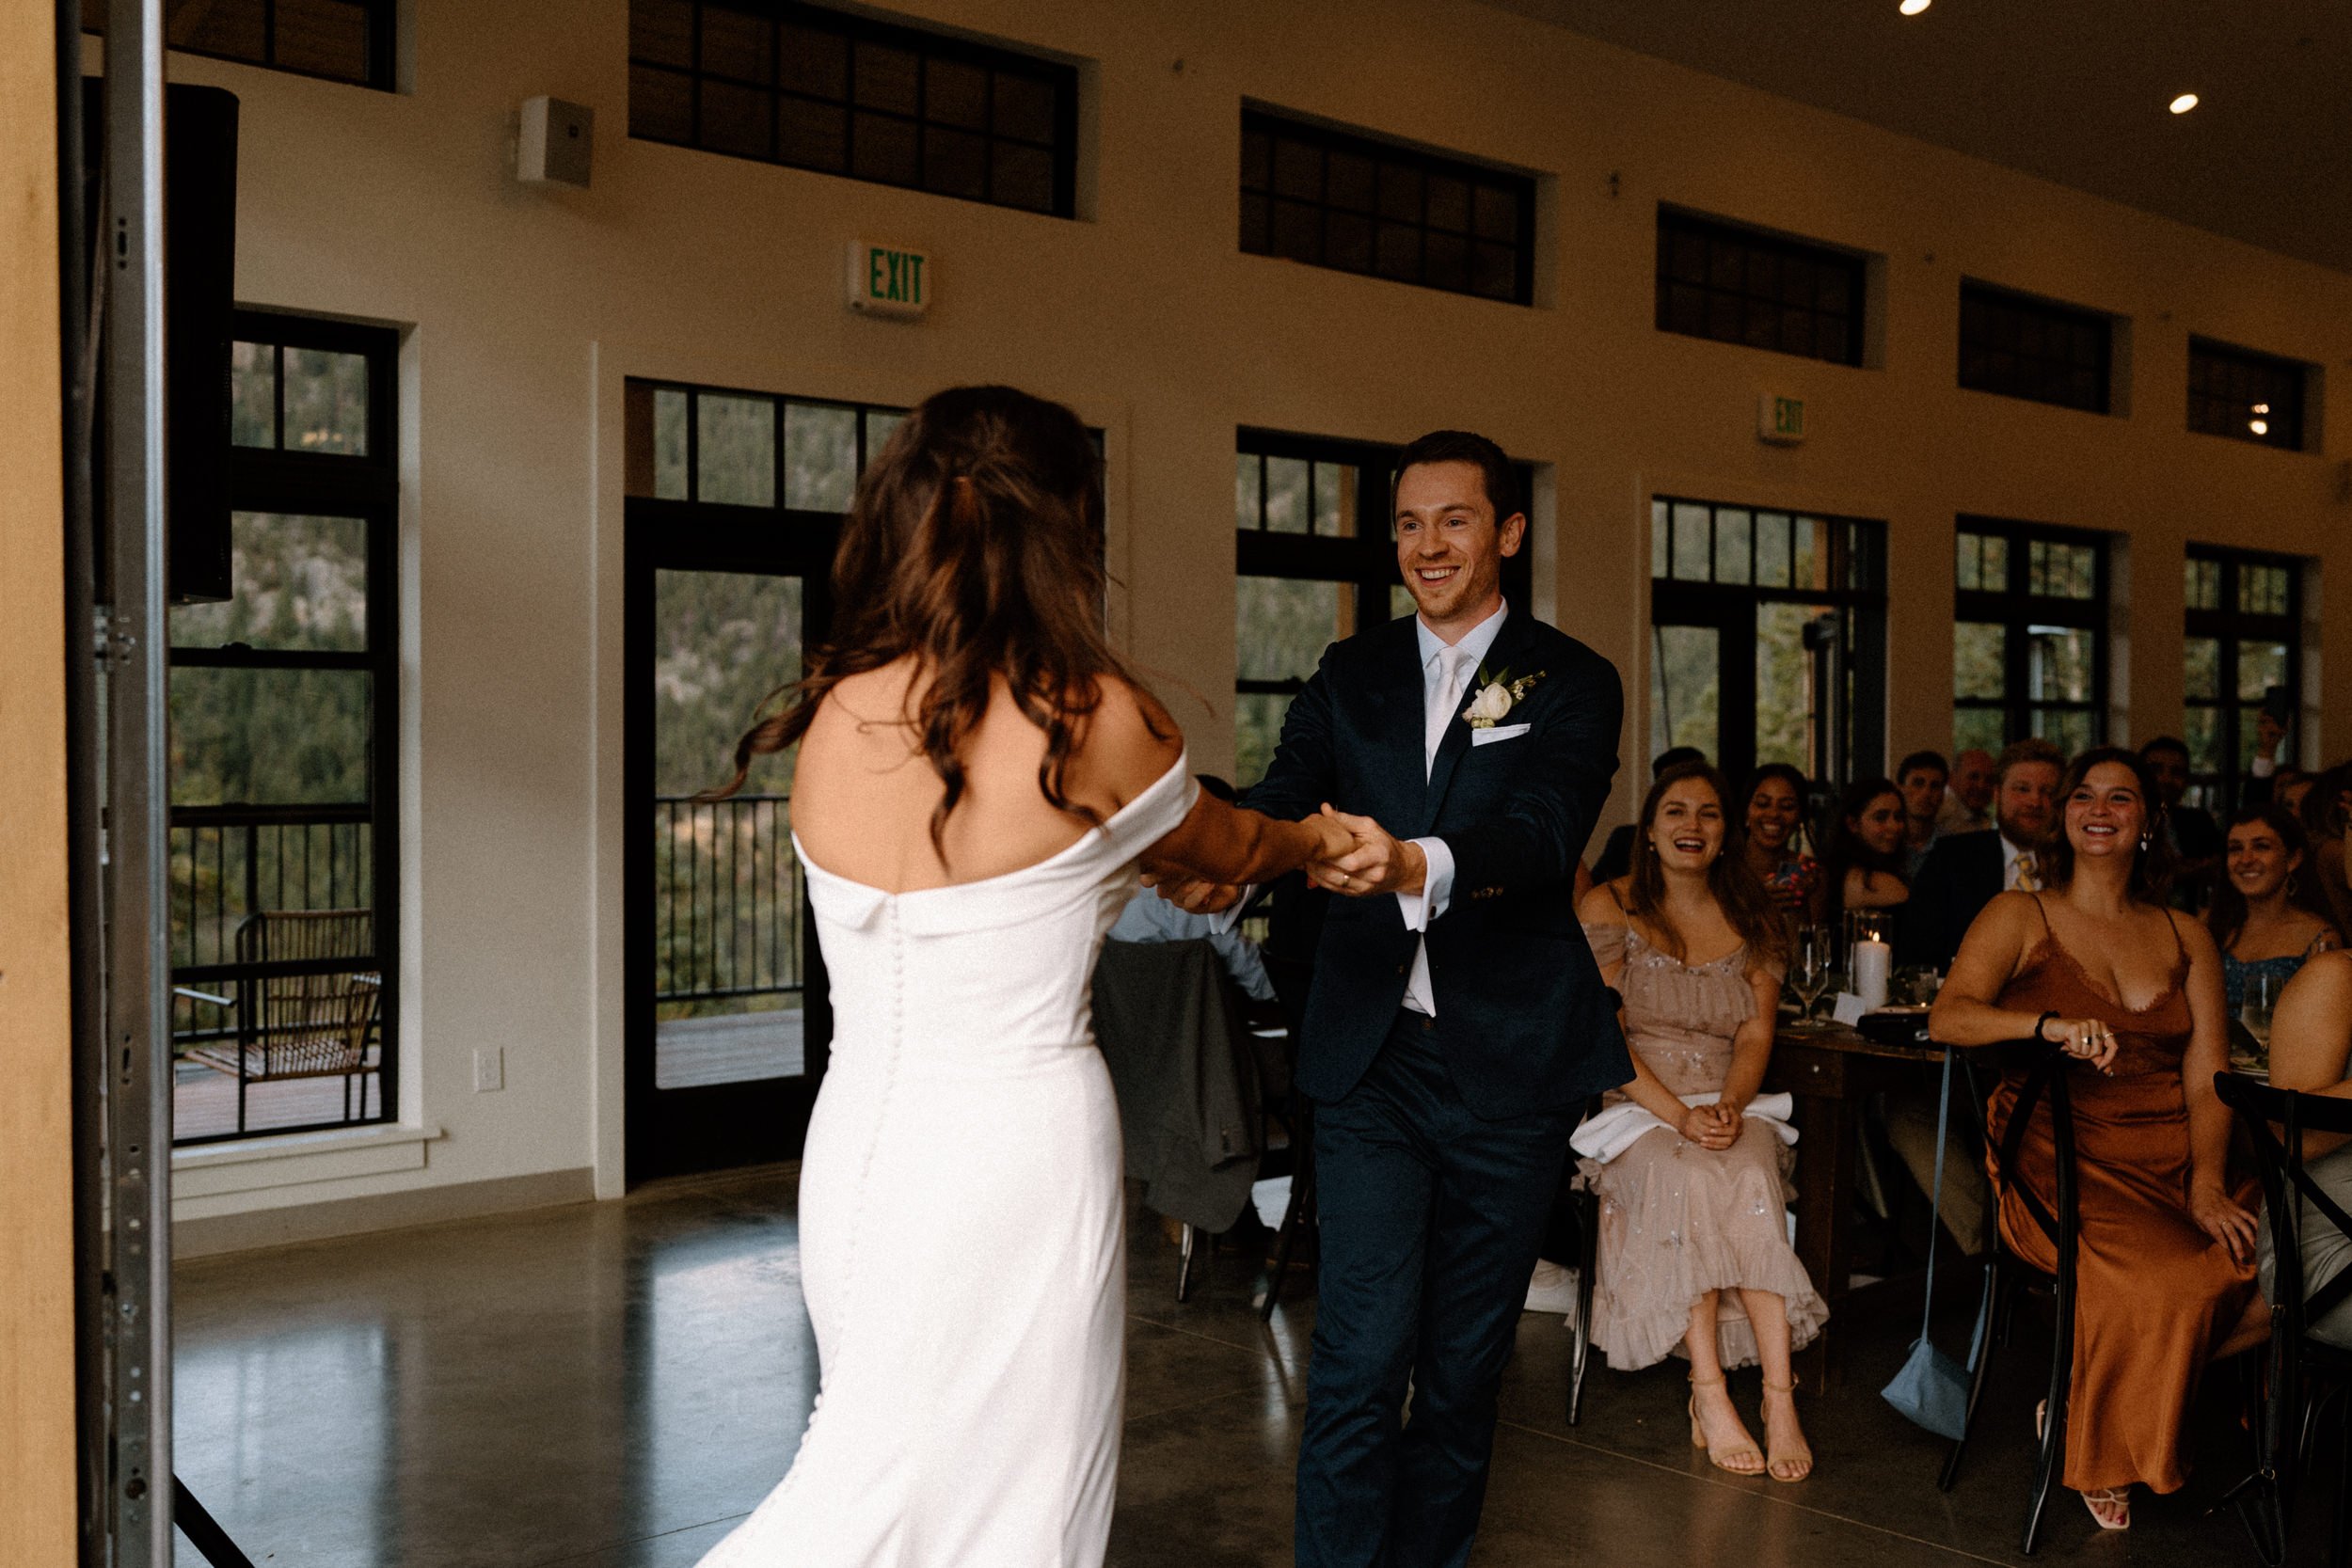 The bride and groom smile at each other during their first dance